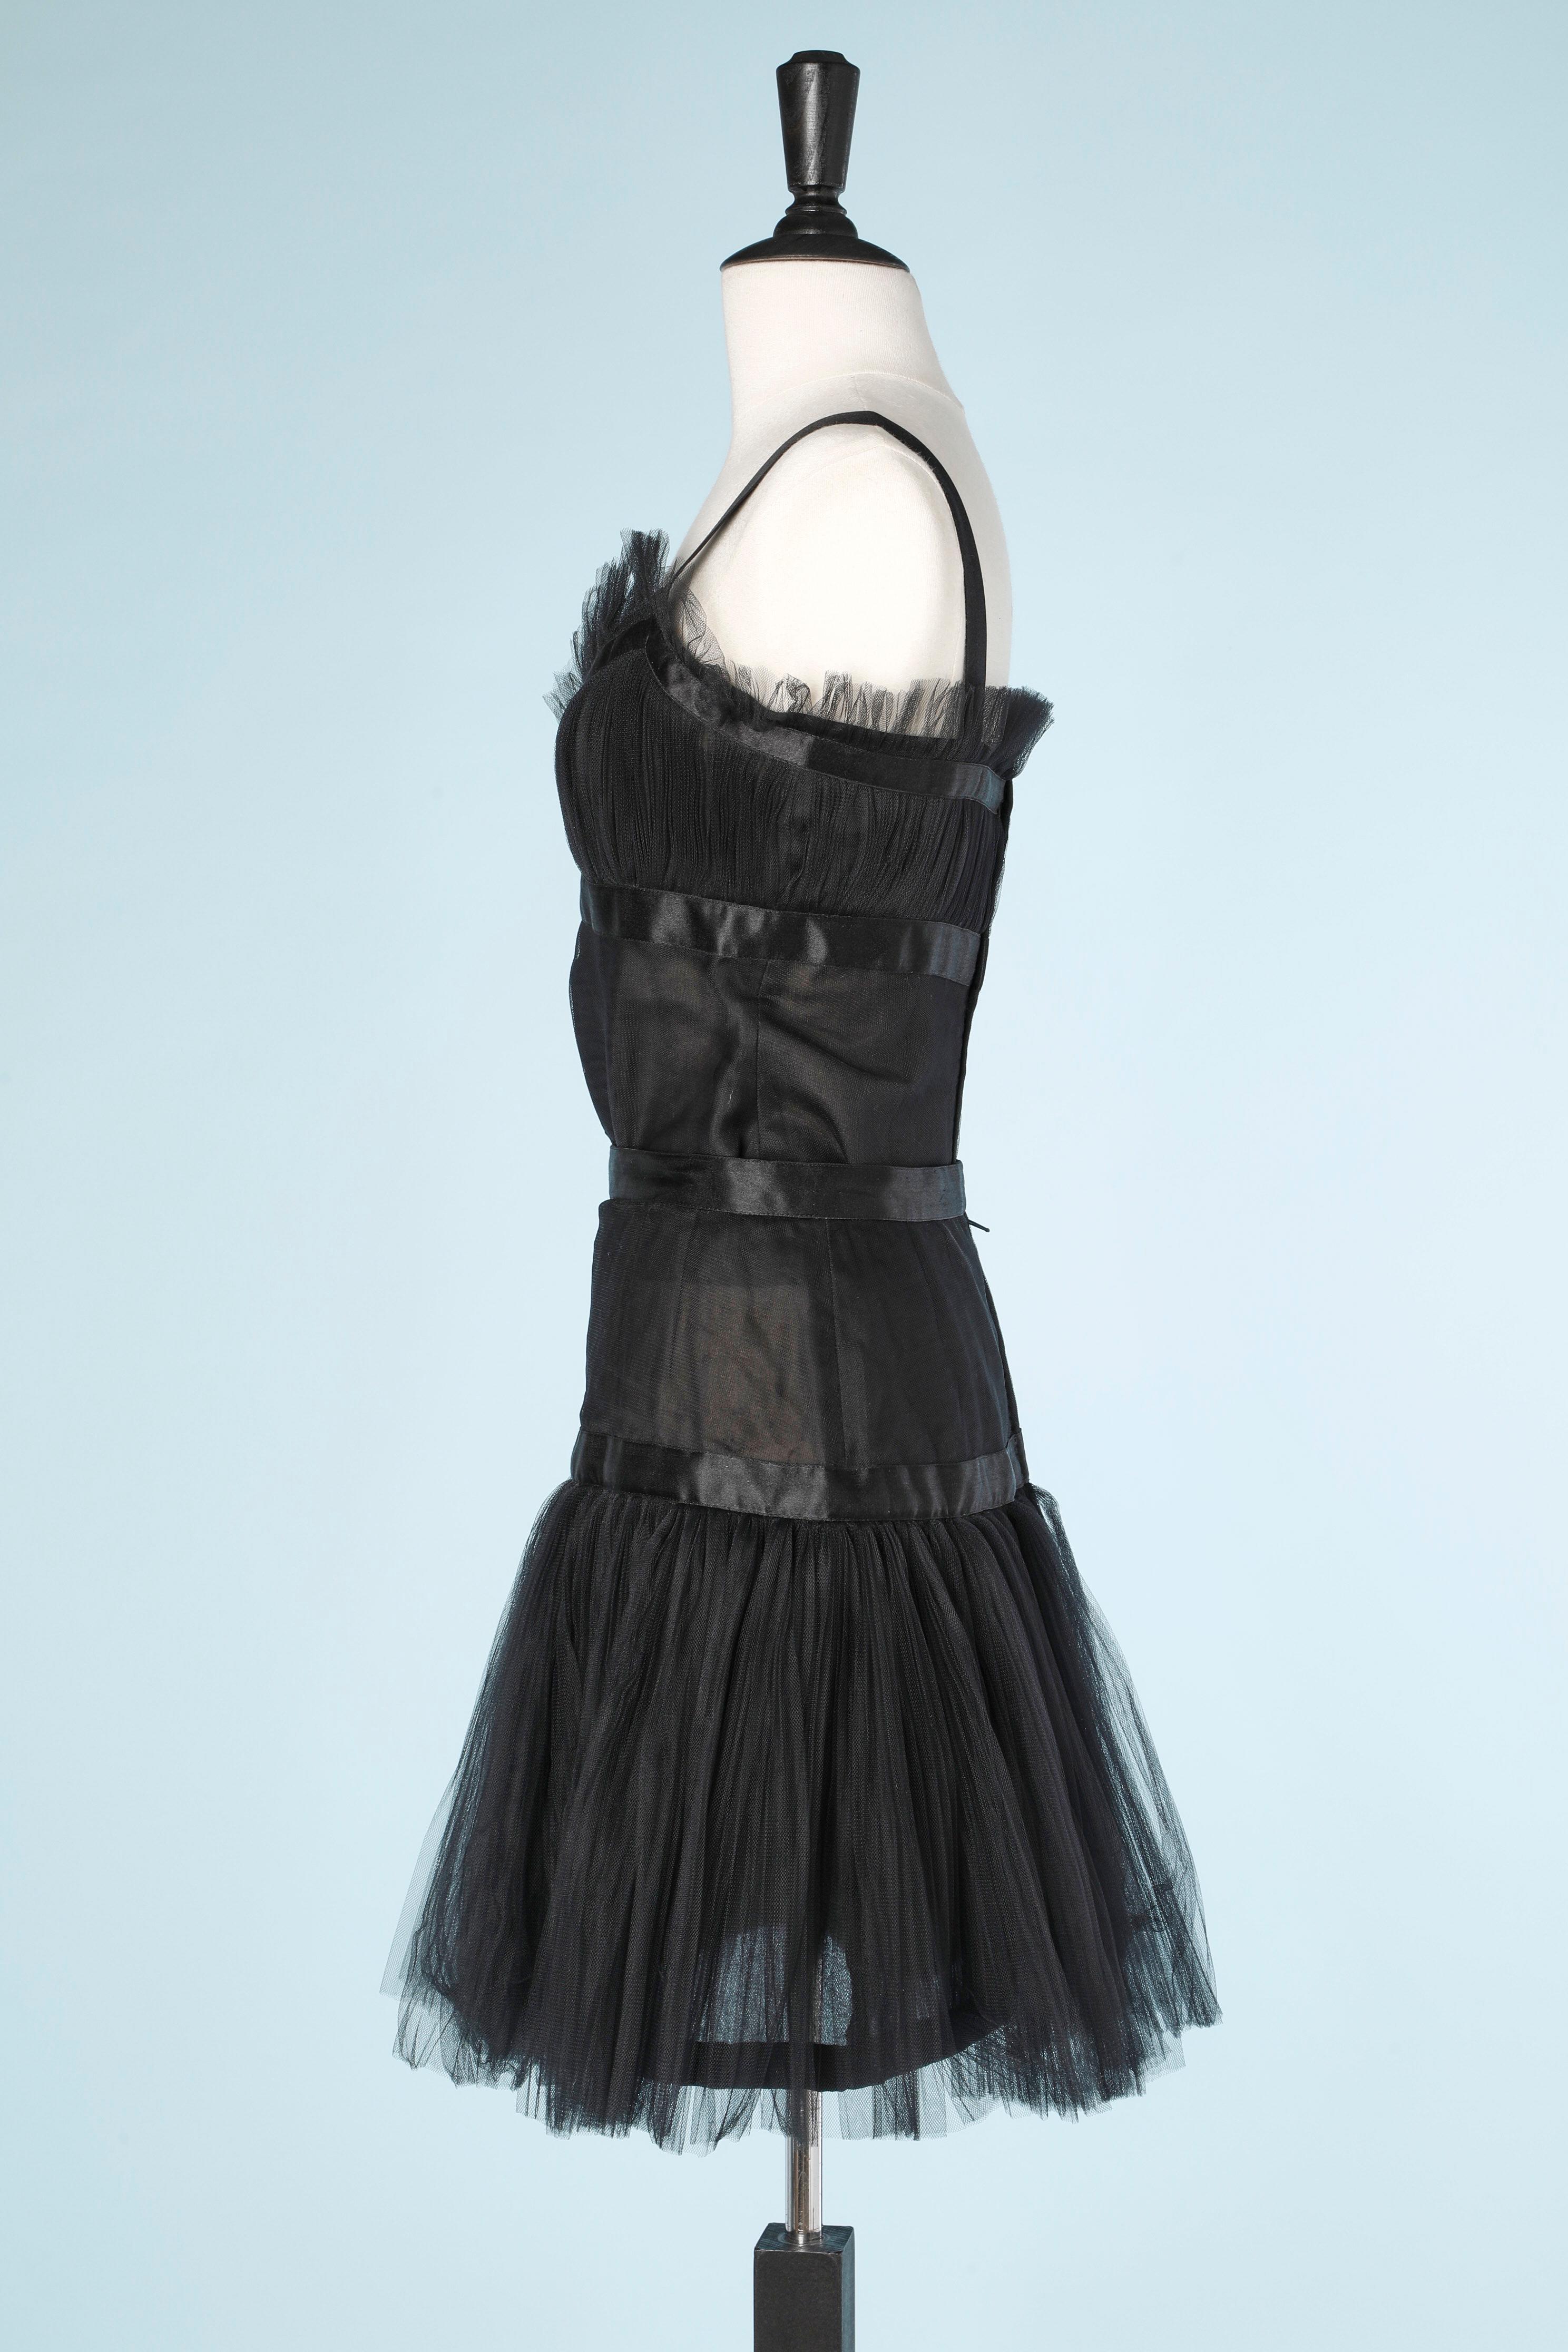 Women's Cocktail top and skirt in black plated tulle and ruffle Renata F  For Sale